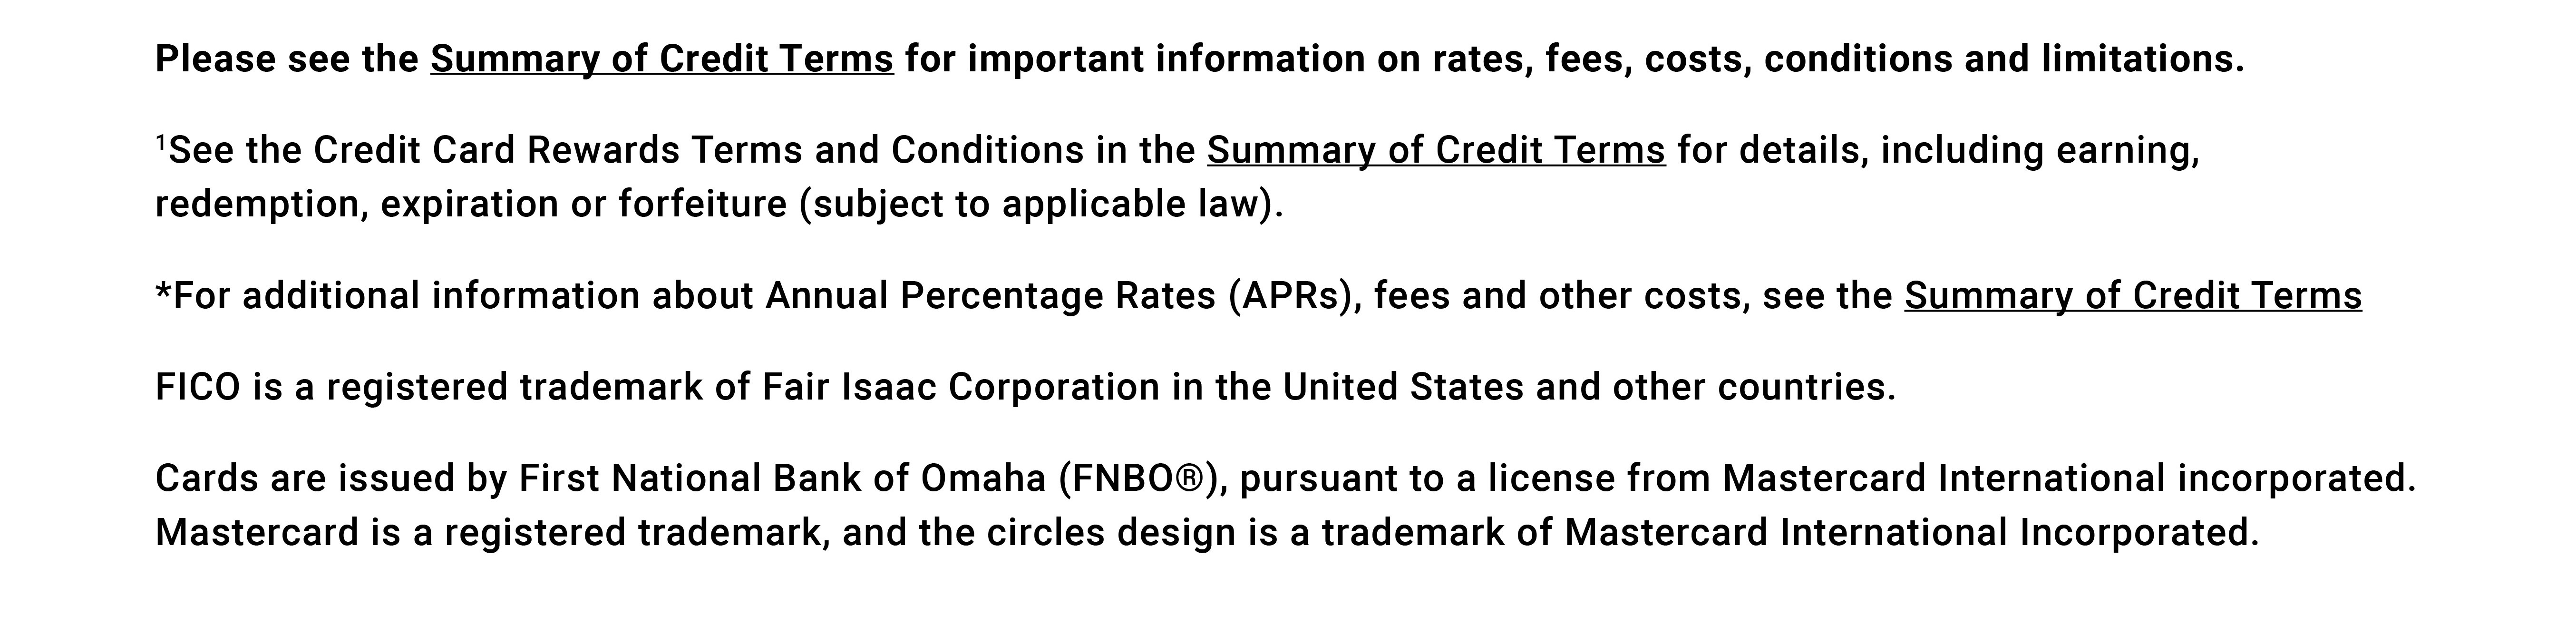 Summary of Credit Terms